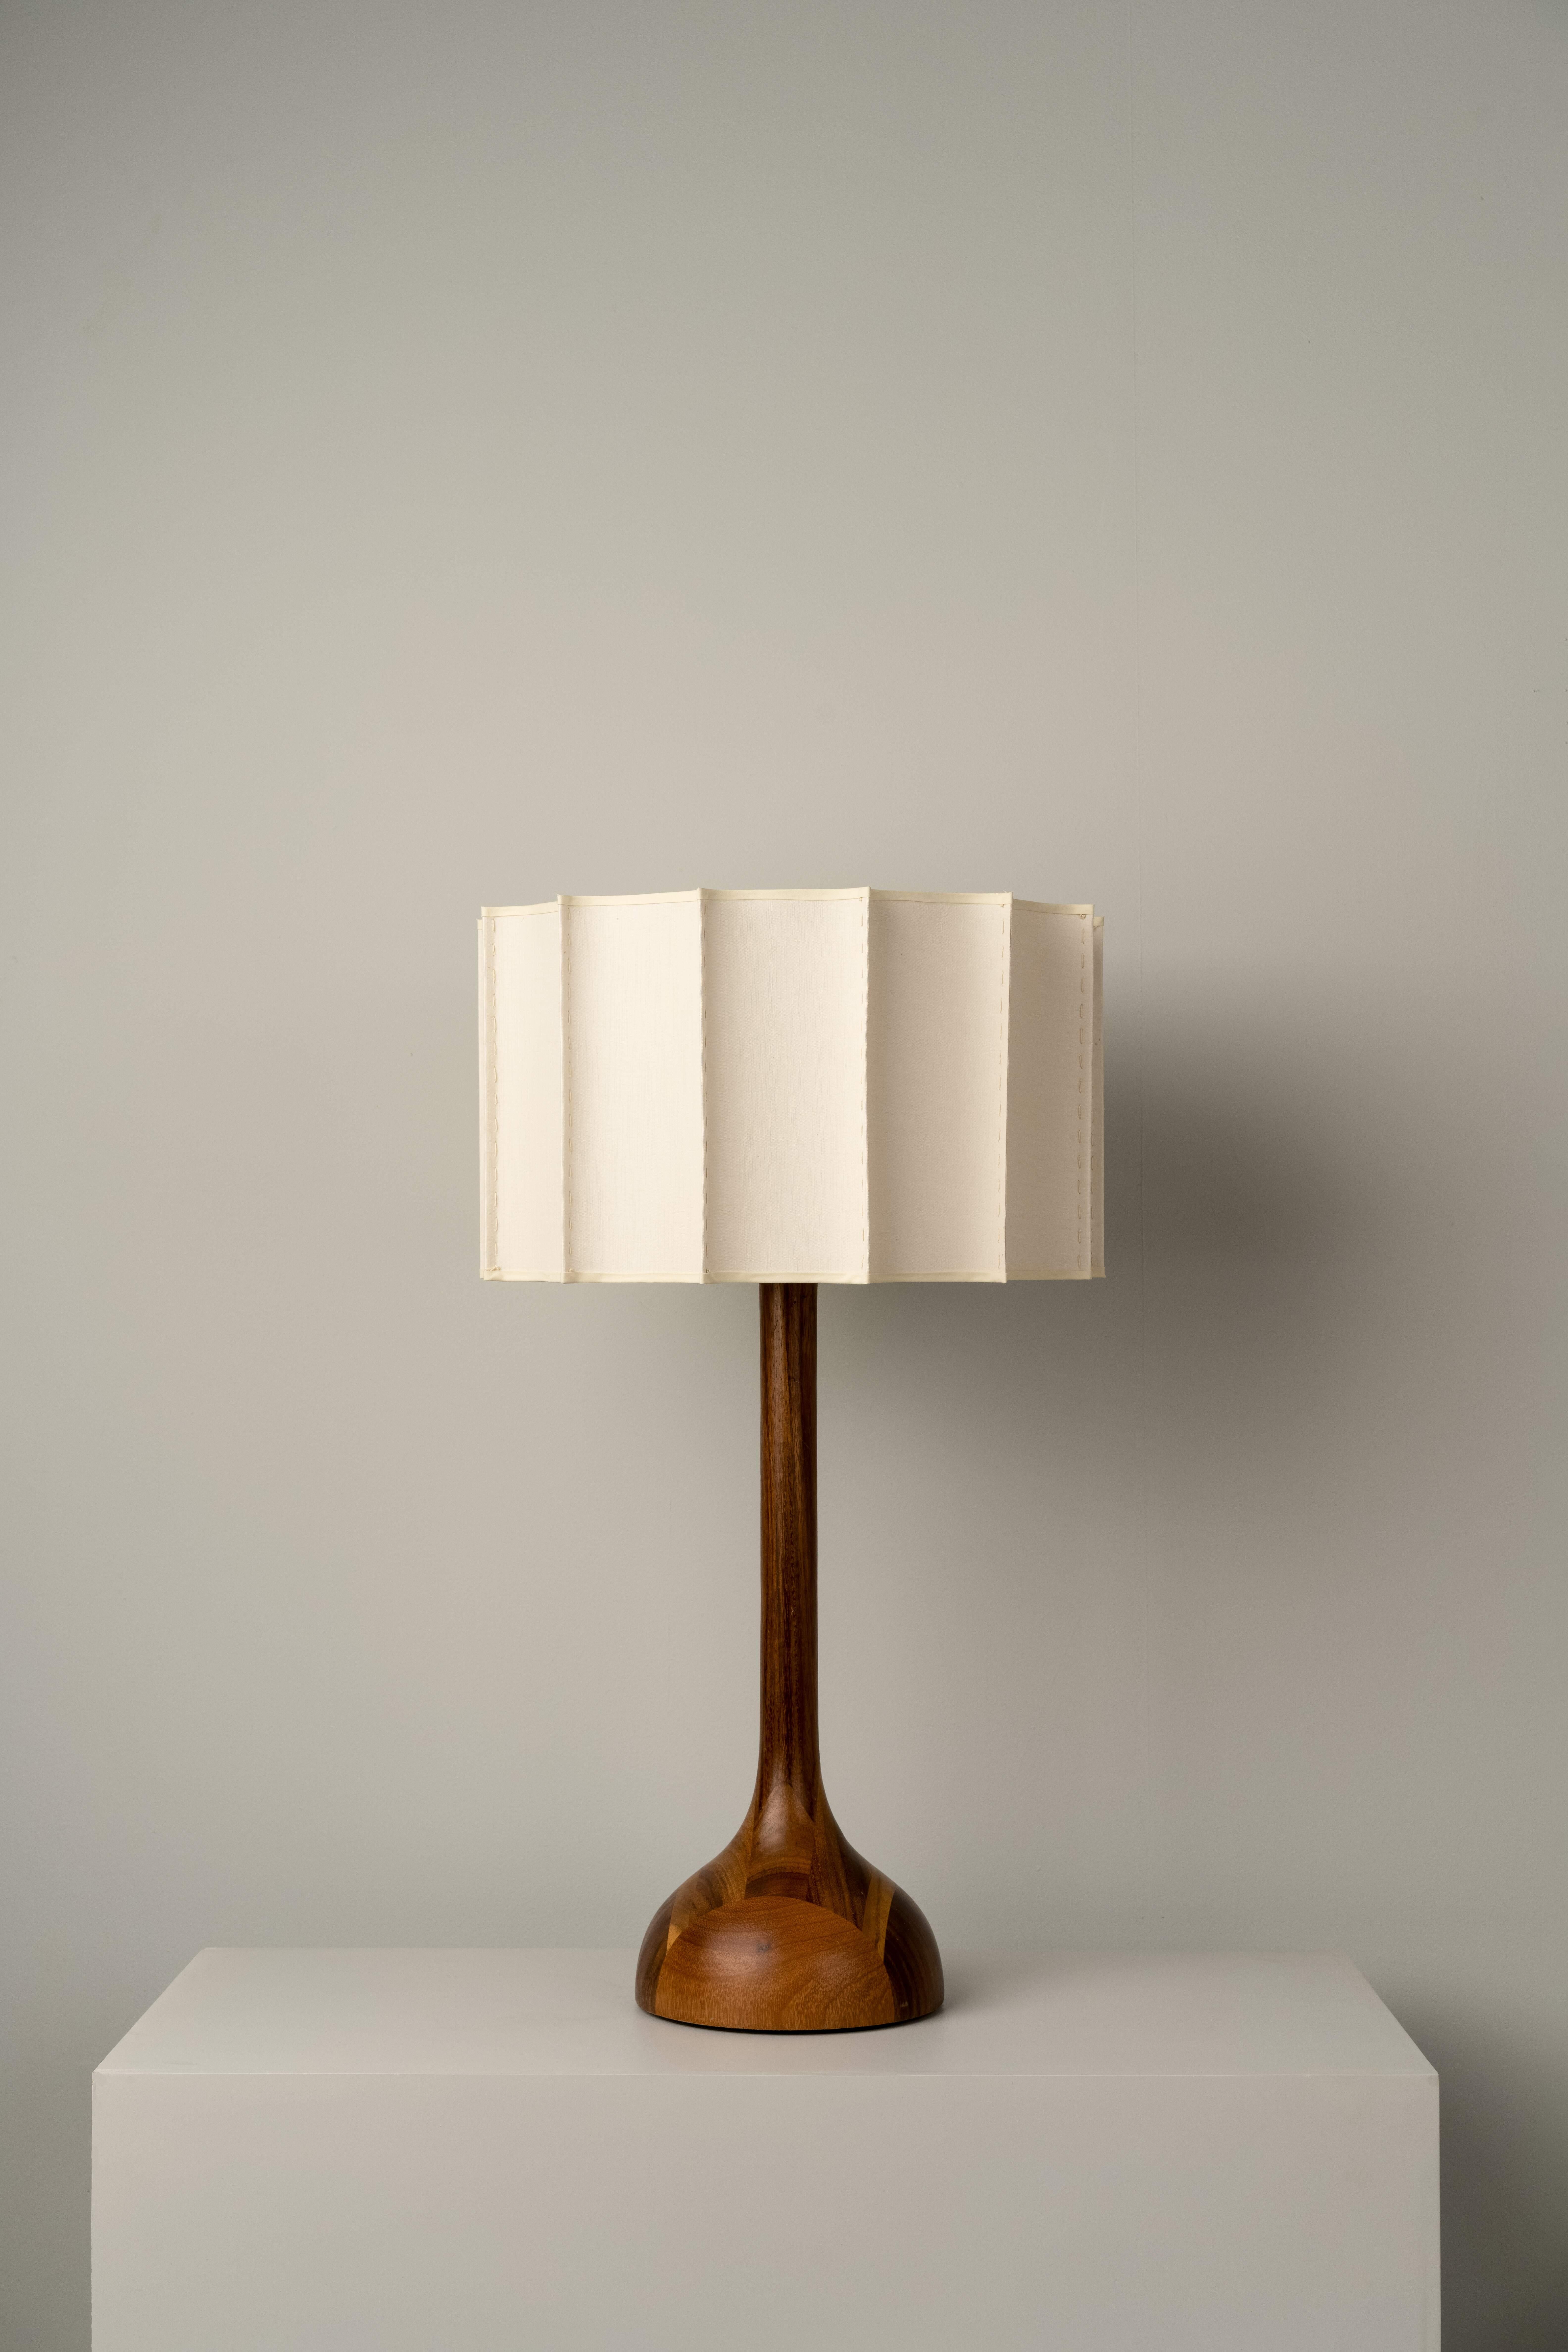 PATA DE ELEFANTE MEDIUM table lamp was designed for the Atomic collection by Mexican artist Isabel Moncada.

Named Pata de Elefante –Elephant's Foot– for the prominent shape at its base. Separated by a long stem is its ornamental, wavy and handmade